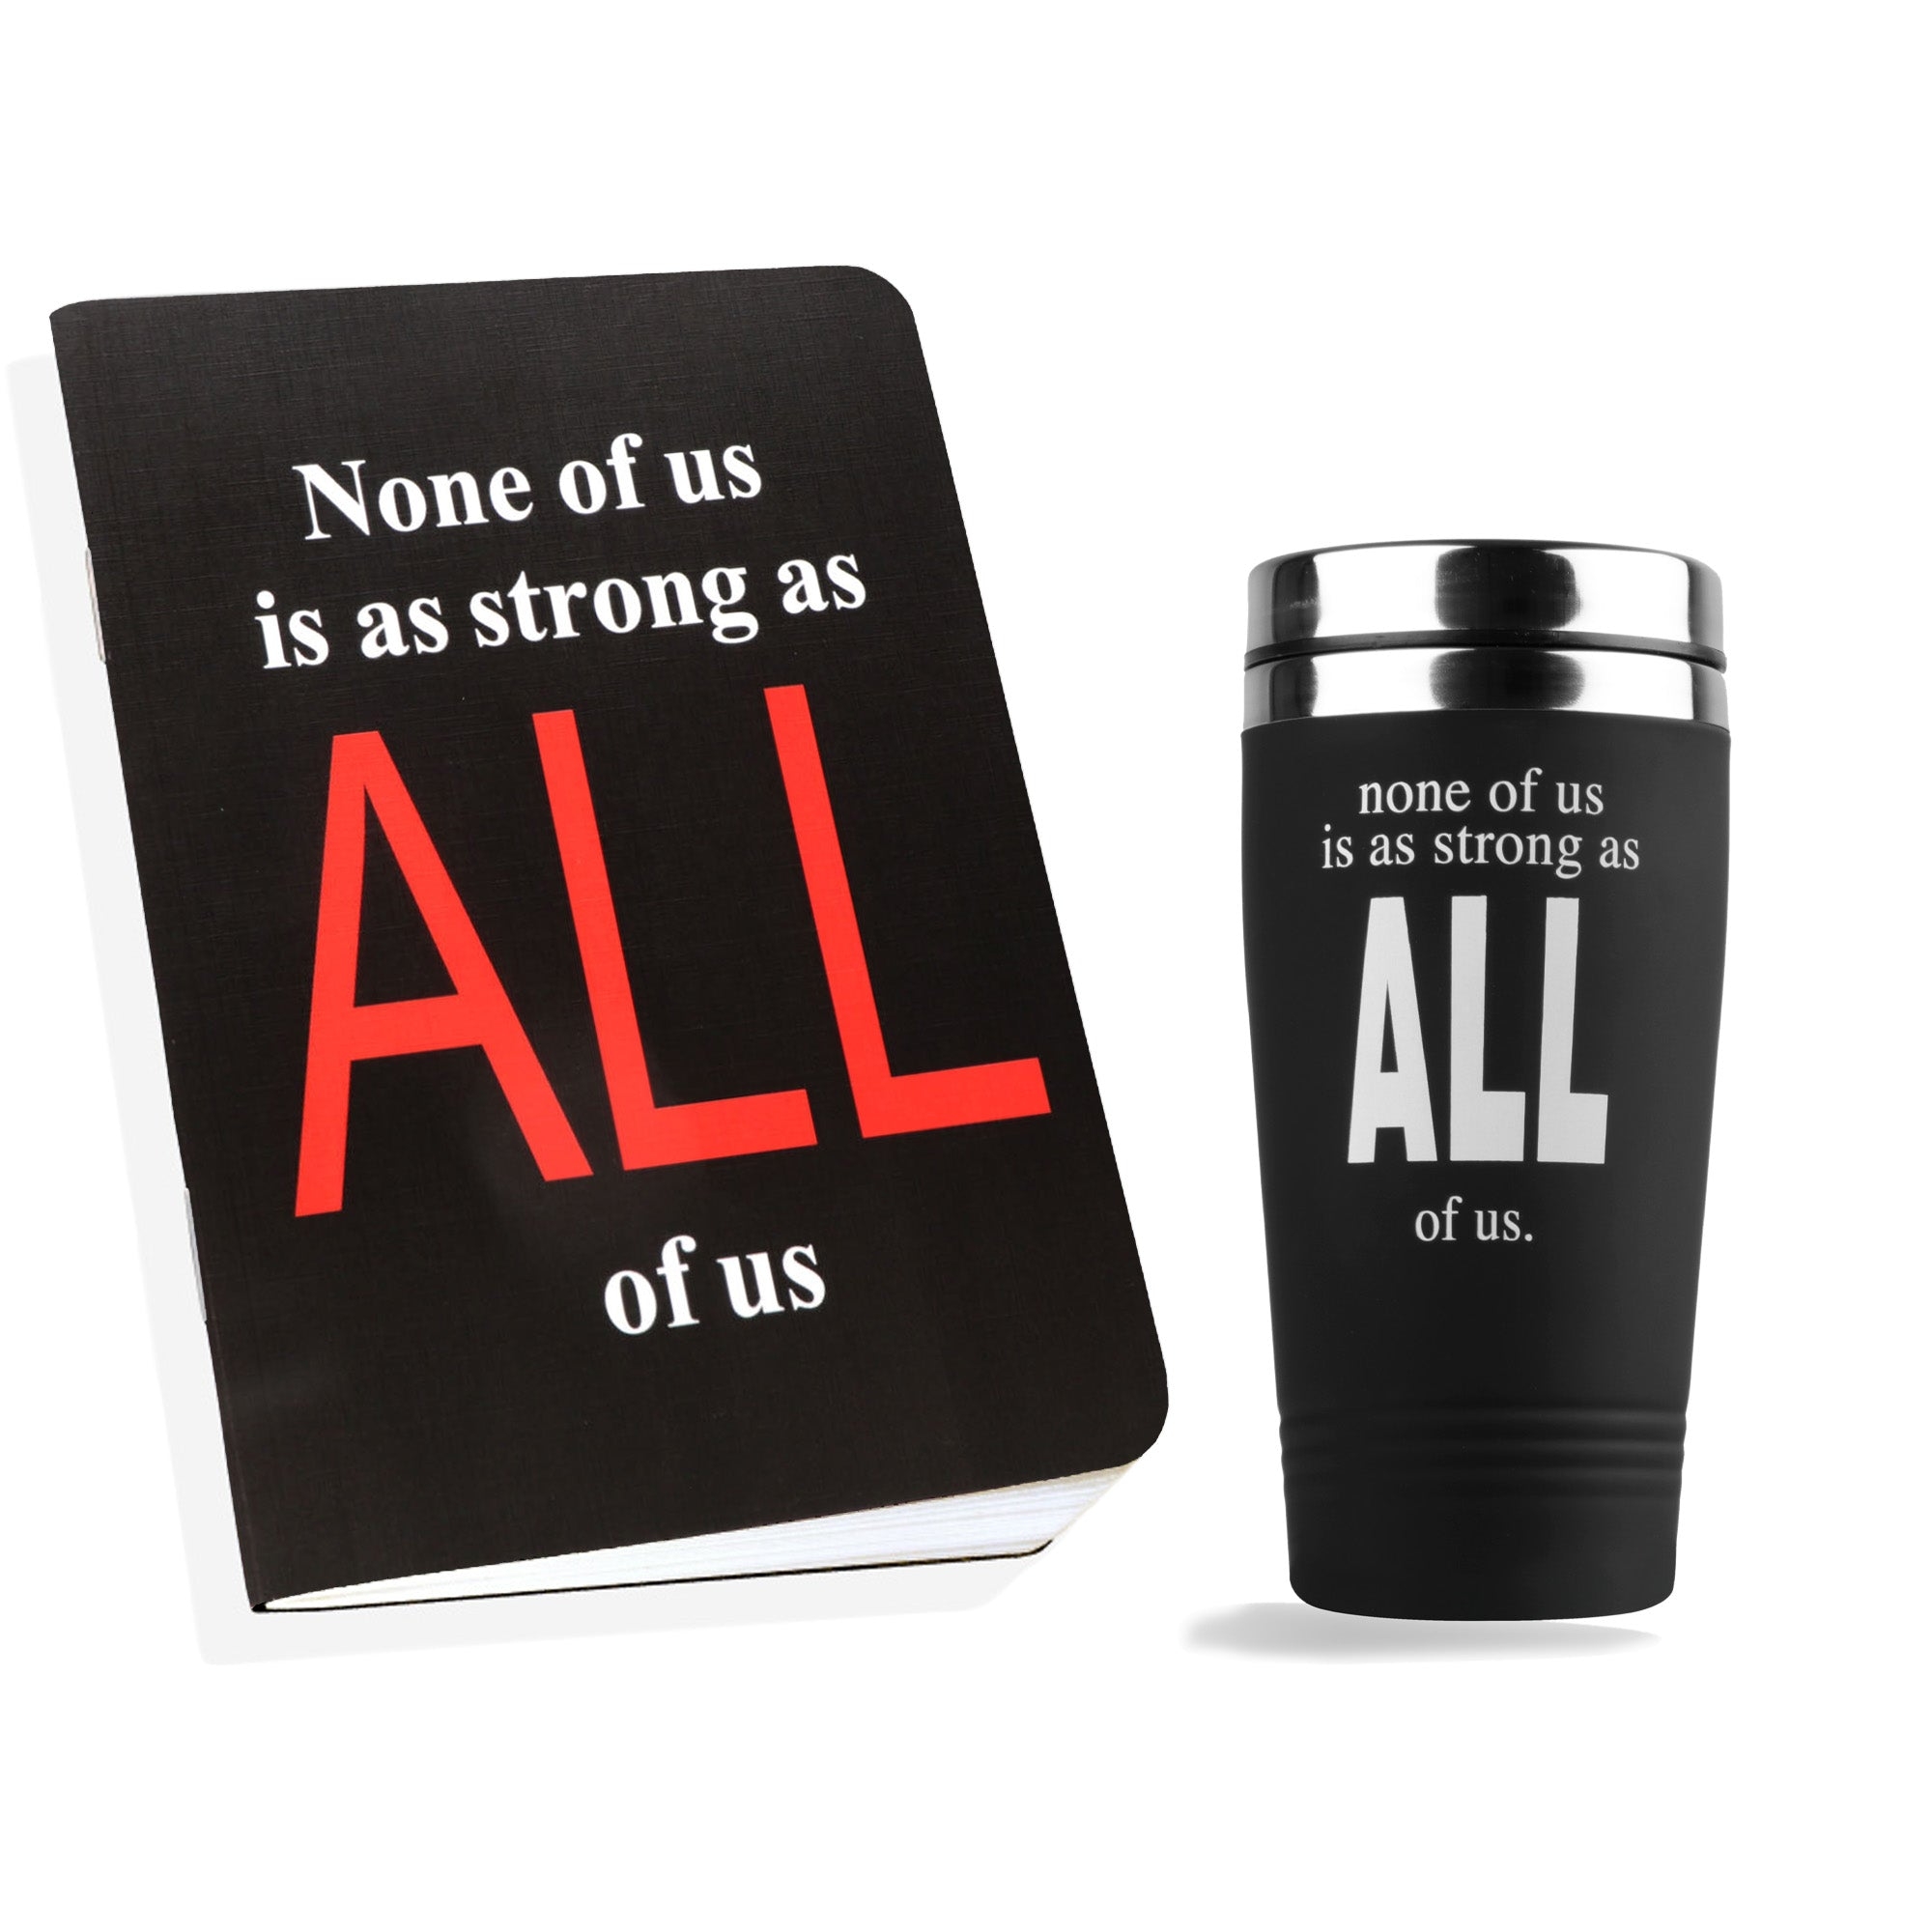 Archies | Archies Printed Stainless Steel Sipper/Shaker & Notebook combo with Corporate Quote Theme